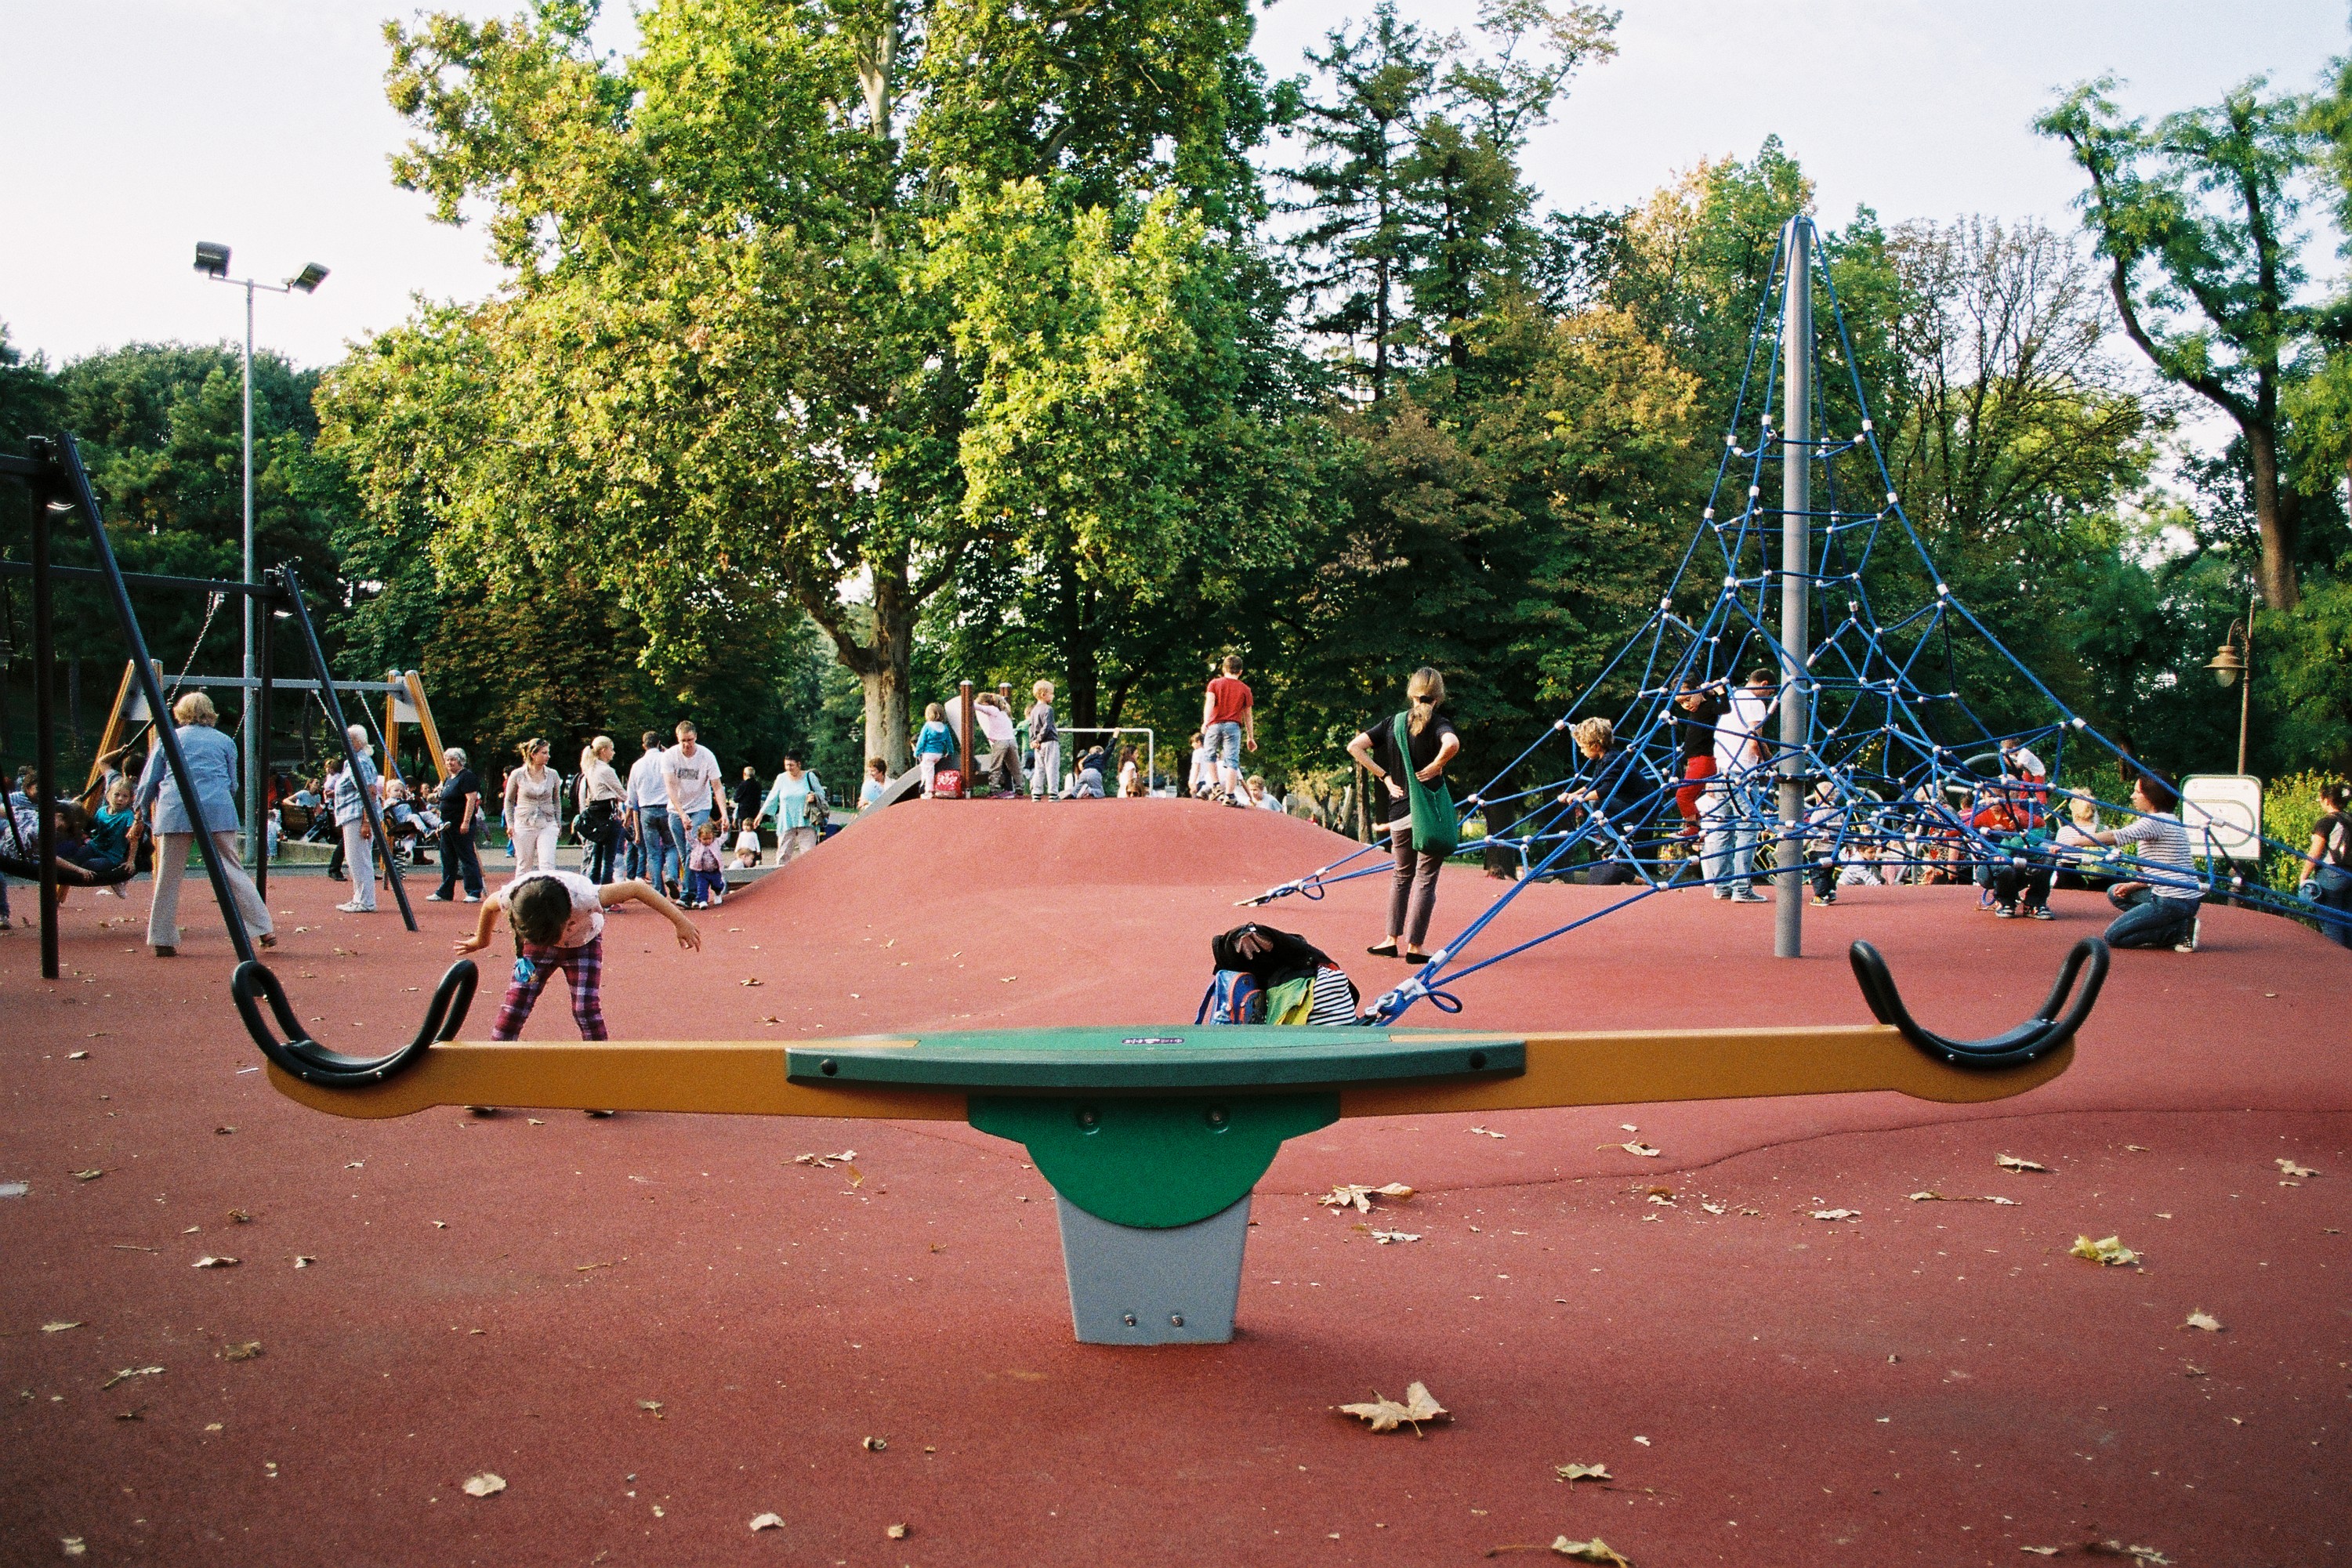 THE FIRST CREATIVE CHILDREN'S PLAYGROUND OPENED IN SERBIA BY ...